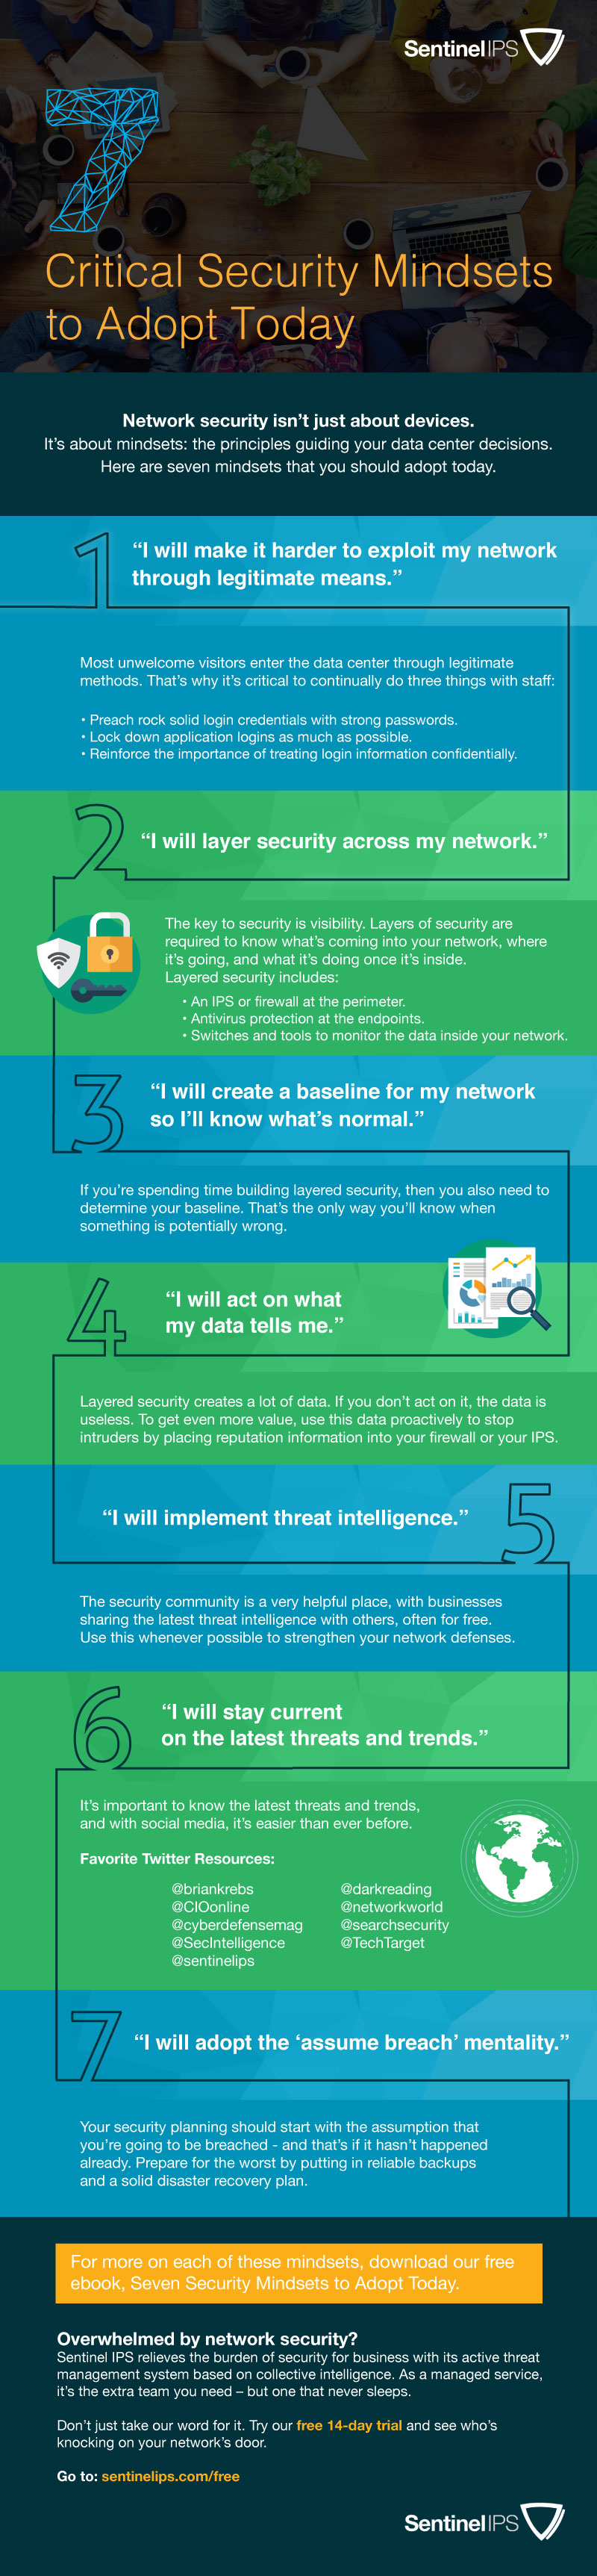 7 Security Mindsets to Adopt Today